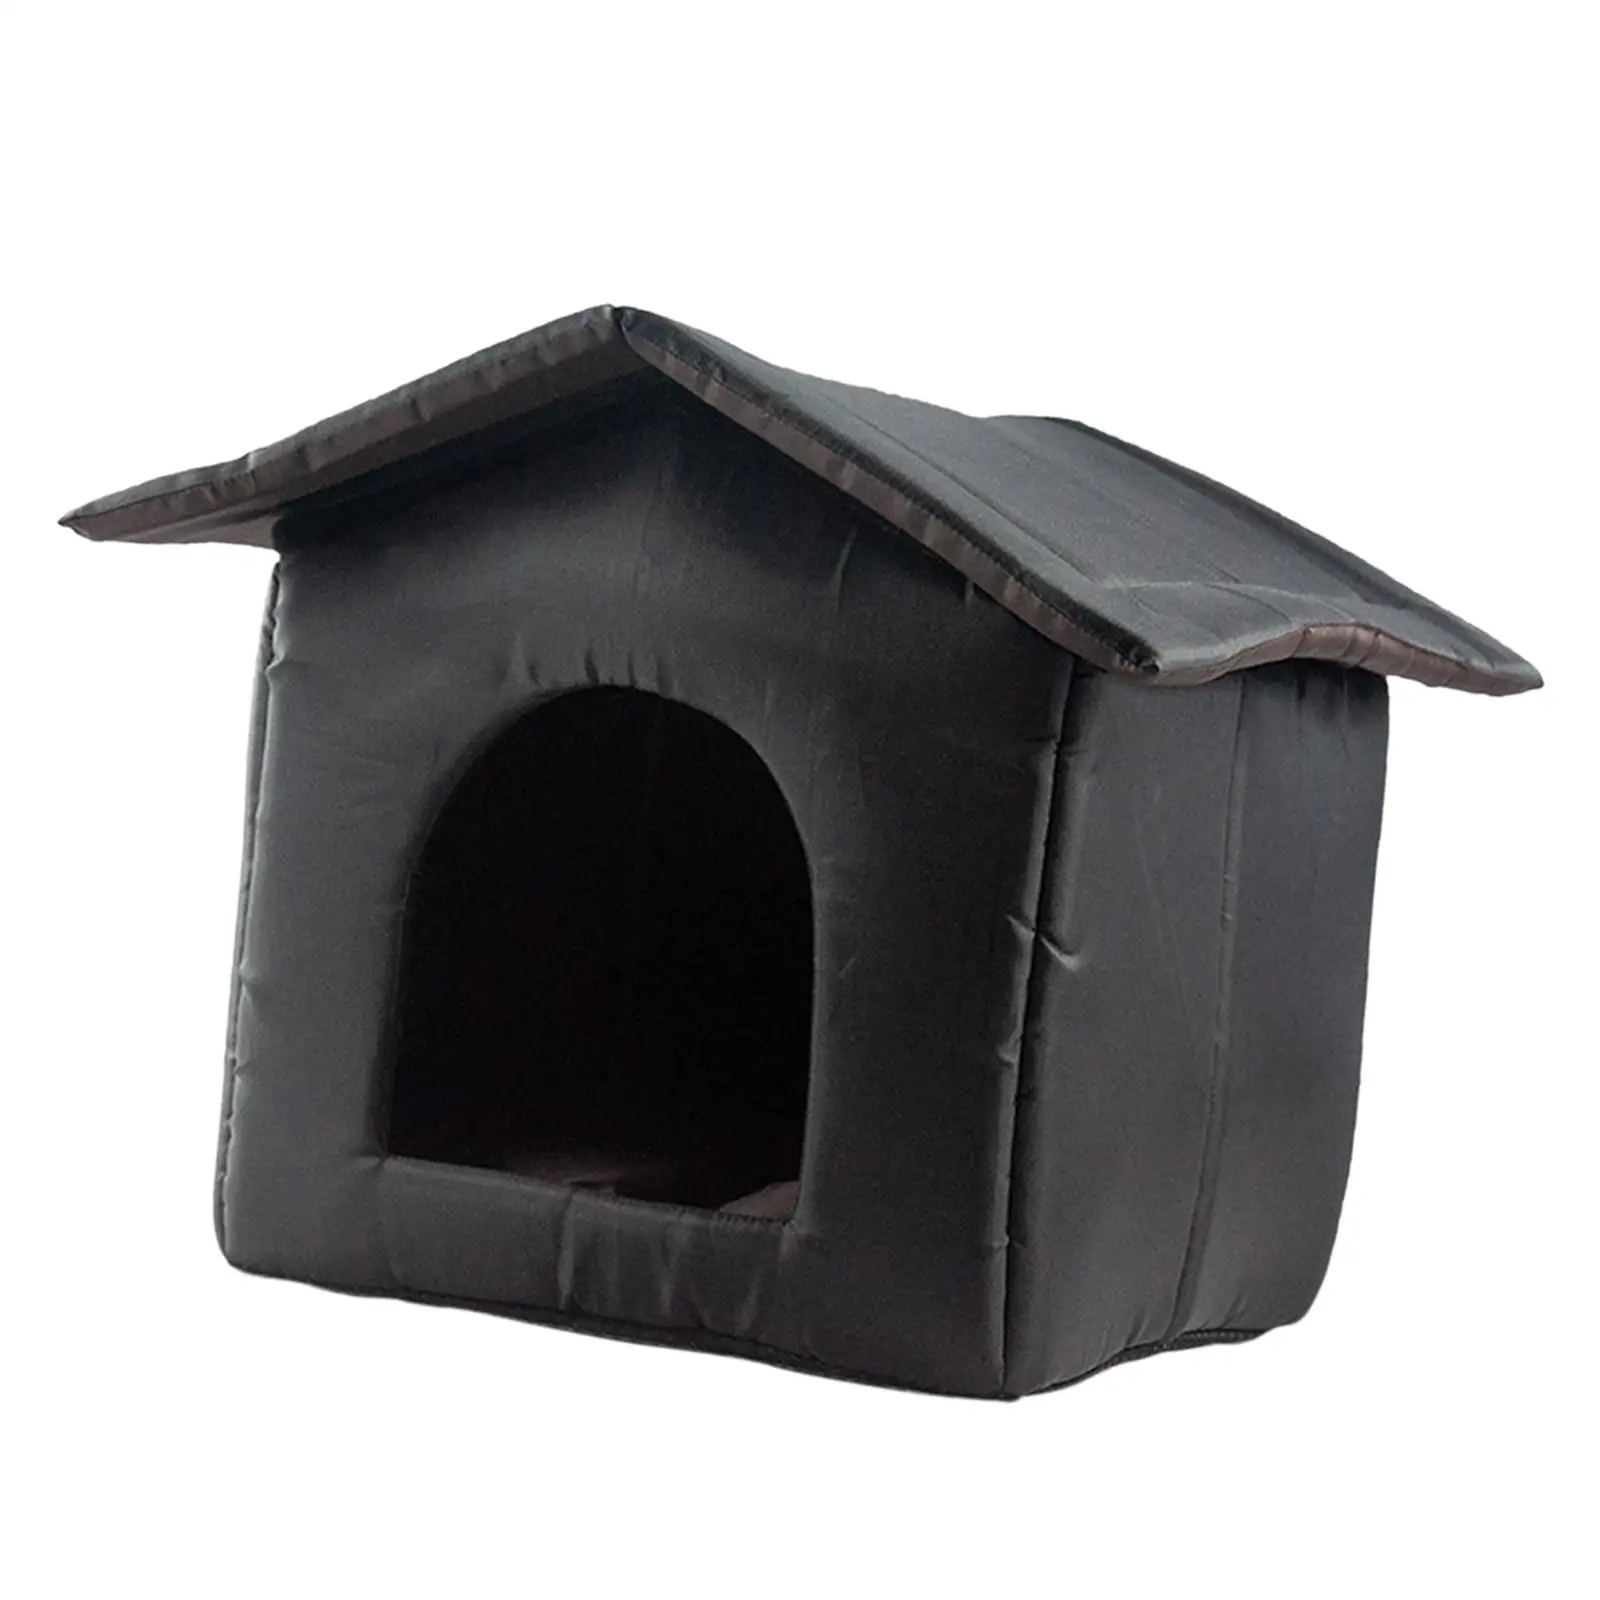 Portable Stray Cats Shelter Waterproof Kennel Winter Cave Bed Furniture Puppy Kitten Pet Supplies Outdoor Feral Cats Warm House